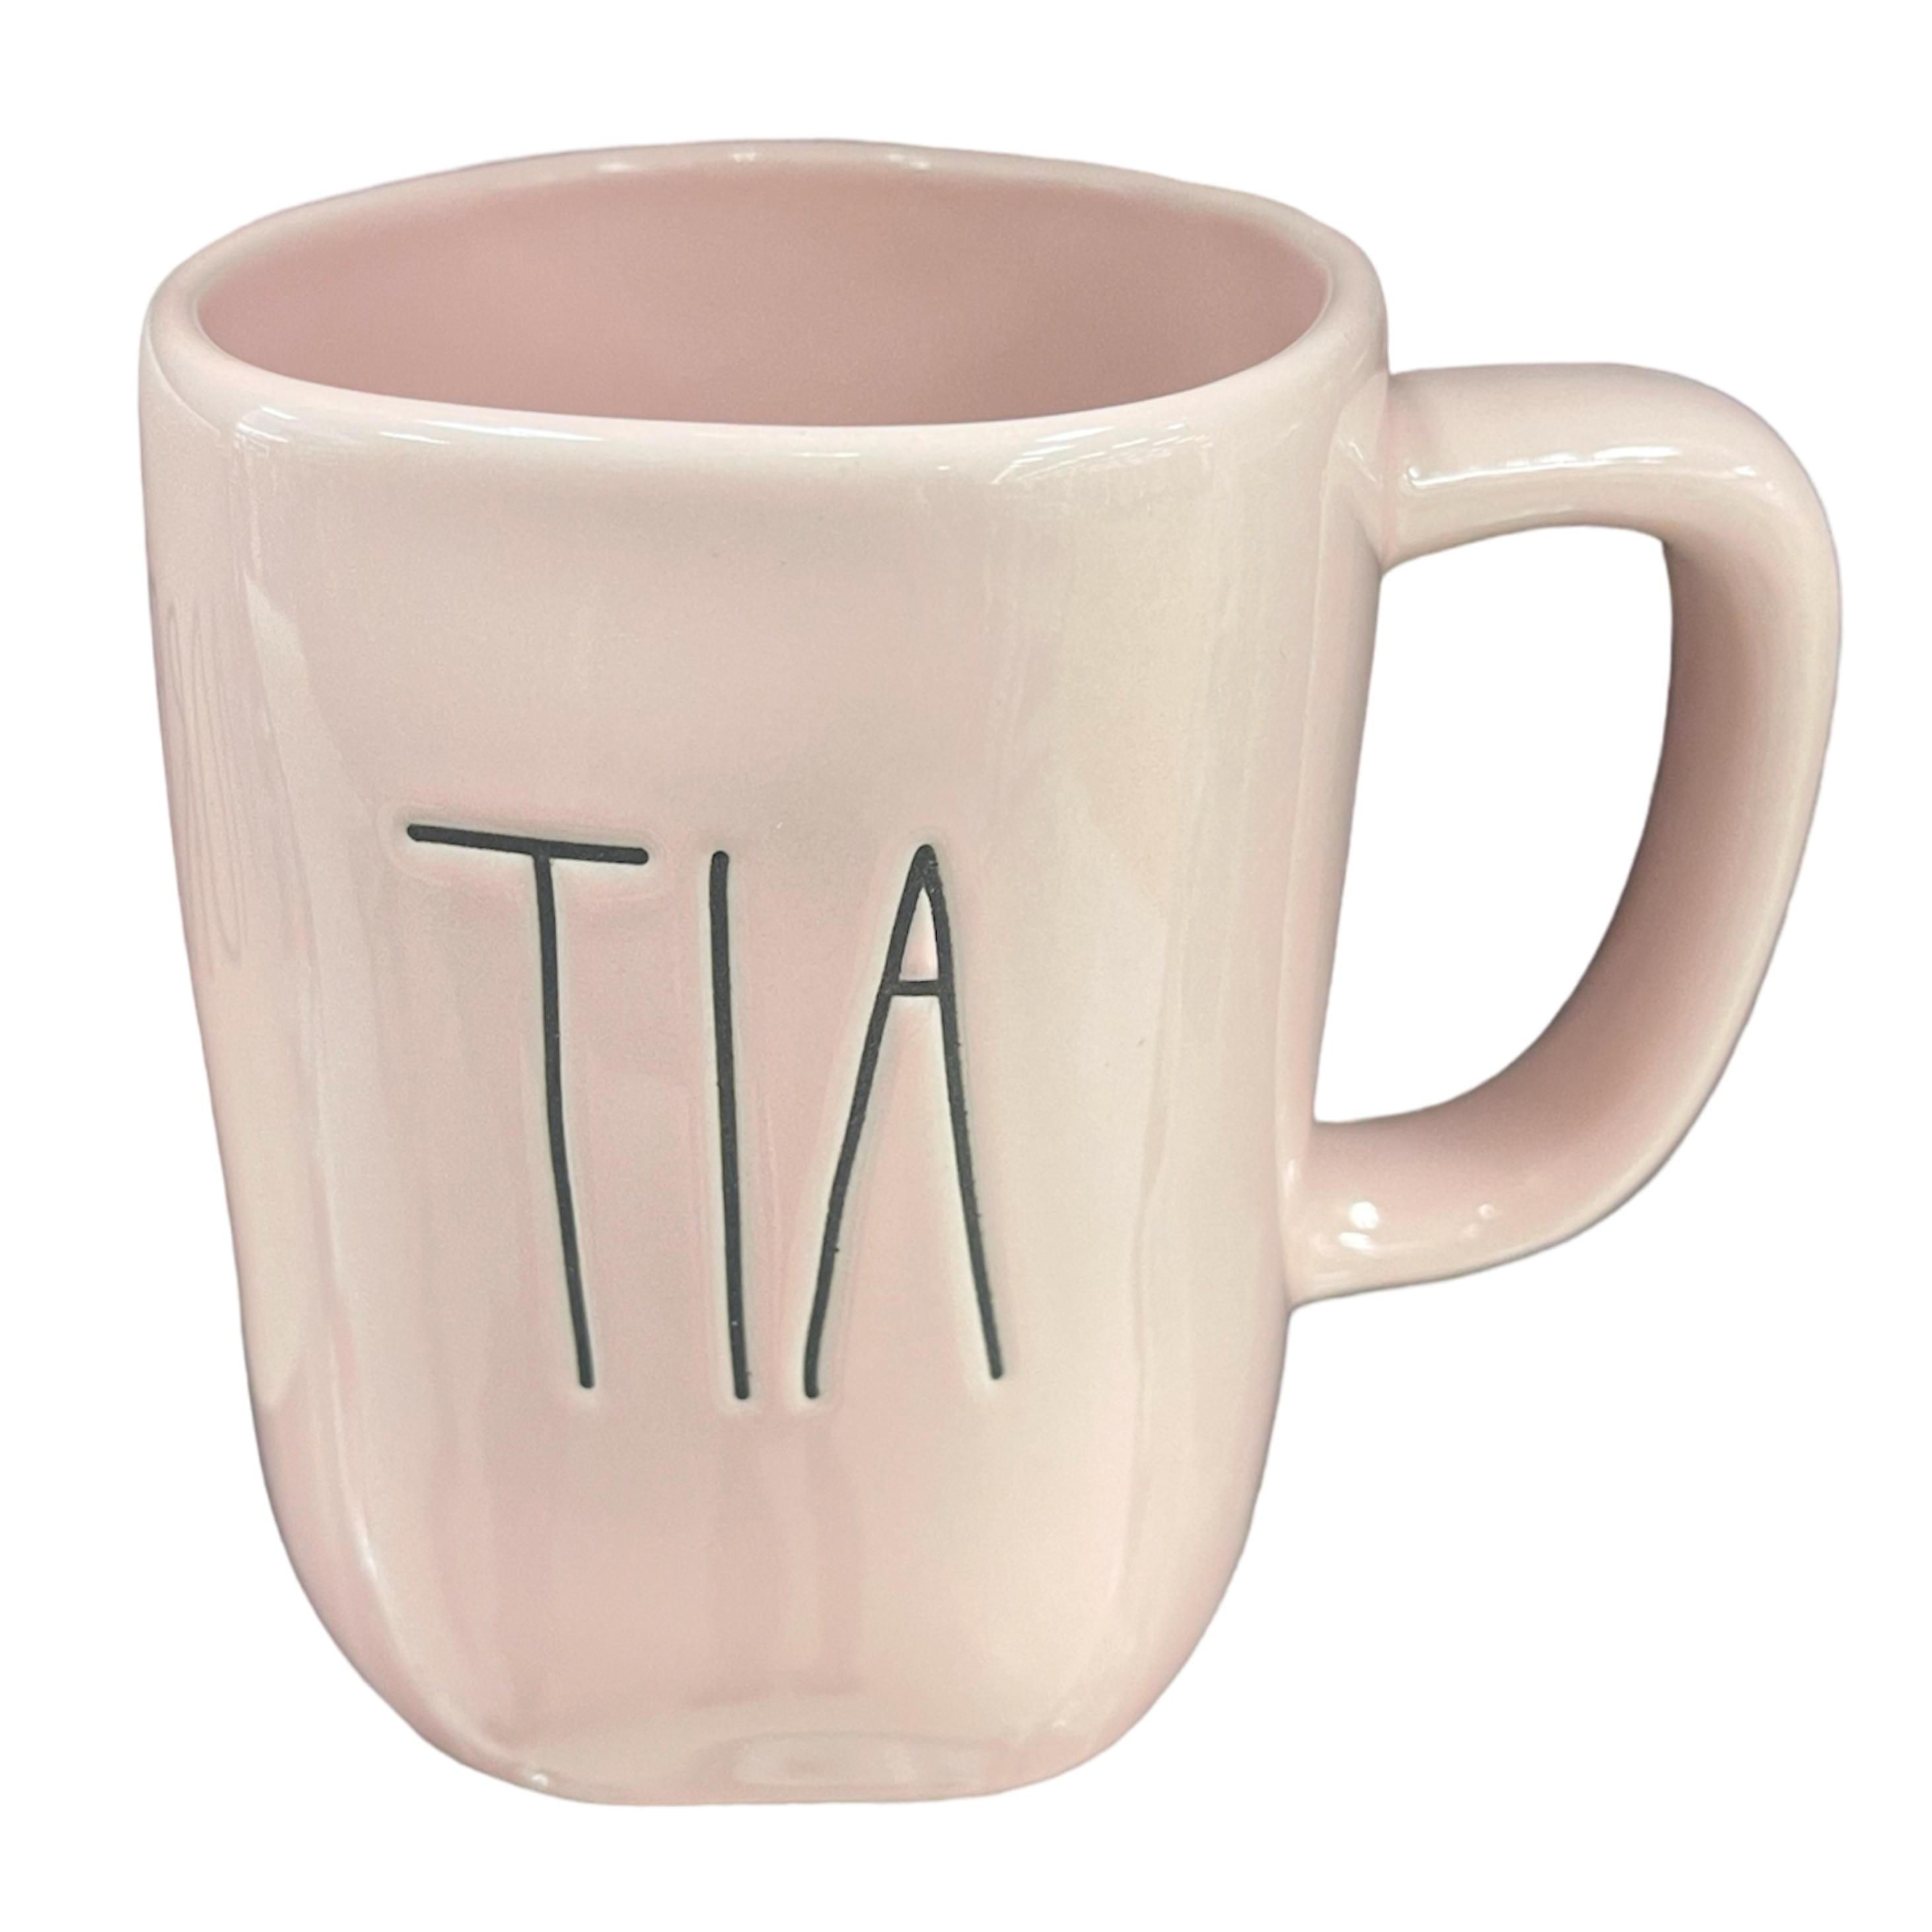 World's Best Tia Mug Minimalist Rae Dunn Style Minimalist Coffee Cup  Aesthetic Ceramic Cups Milk Tea Water Beverages Porcelain Mugs for Home  Kitchen Bar Club Coffee Shop Office 